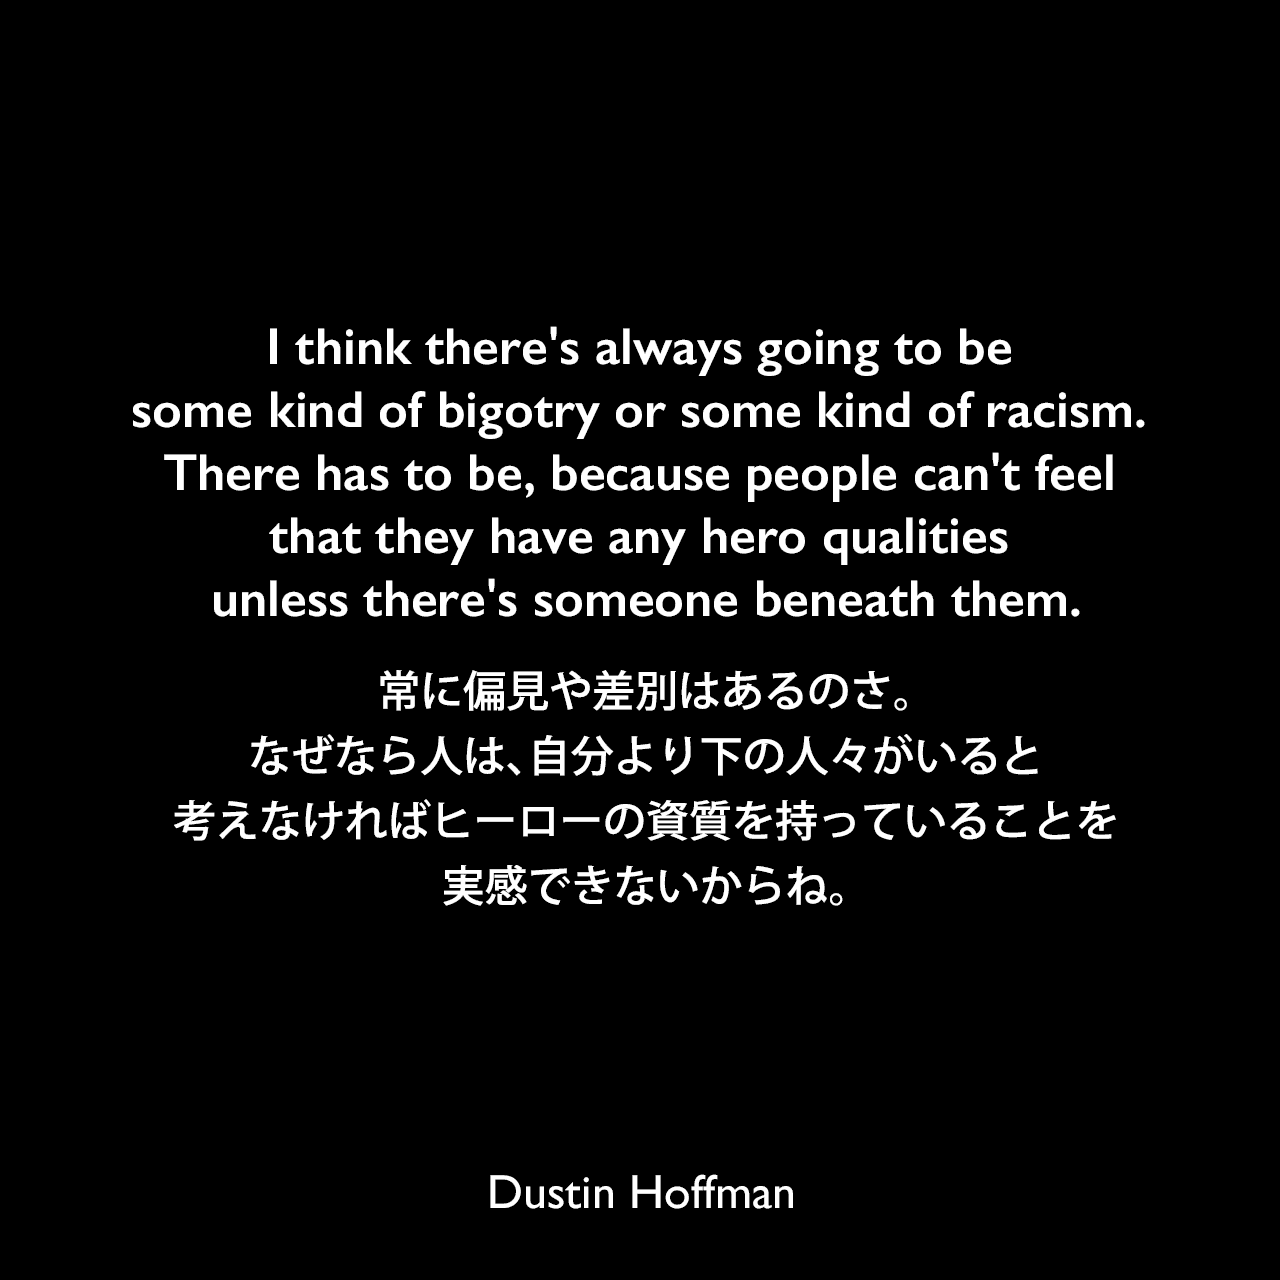 I think there's always going to be some kind of bigotry or some kind of racism. There has to be, because people can't feel that they have any hero qualities unless there's someone beneath them.常に偏見や差別はあるのさ。なぜなら人は、自分より下の人々がいると考えなければヒーローの資質を持っていることを実感できないからね。